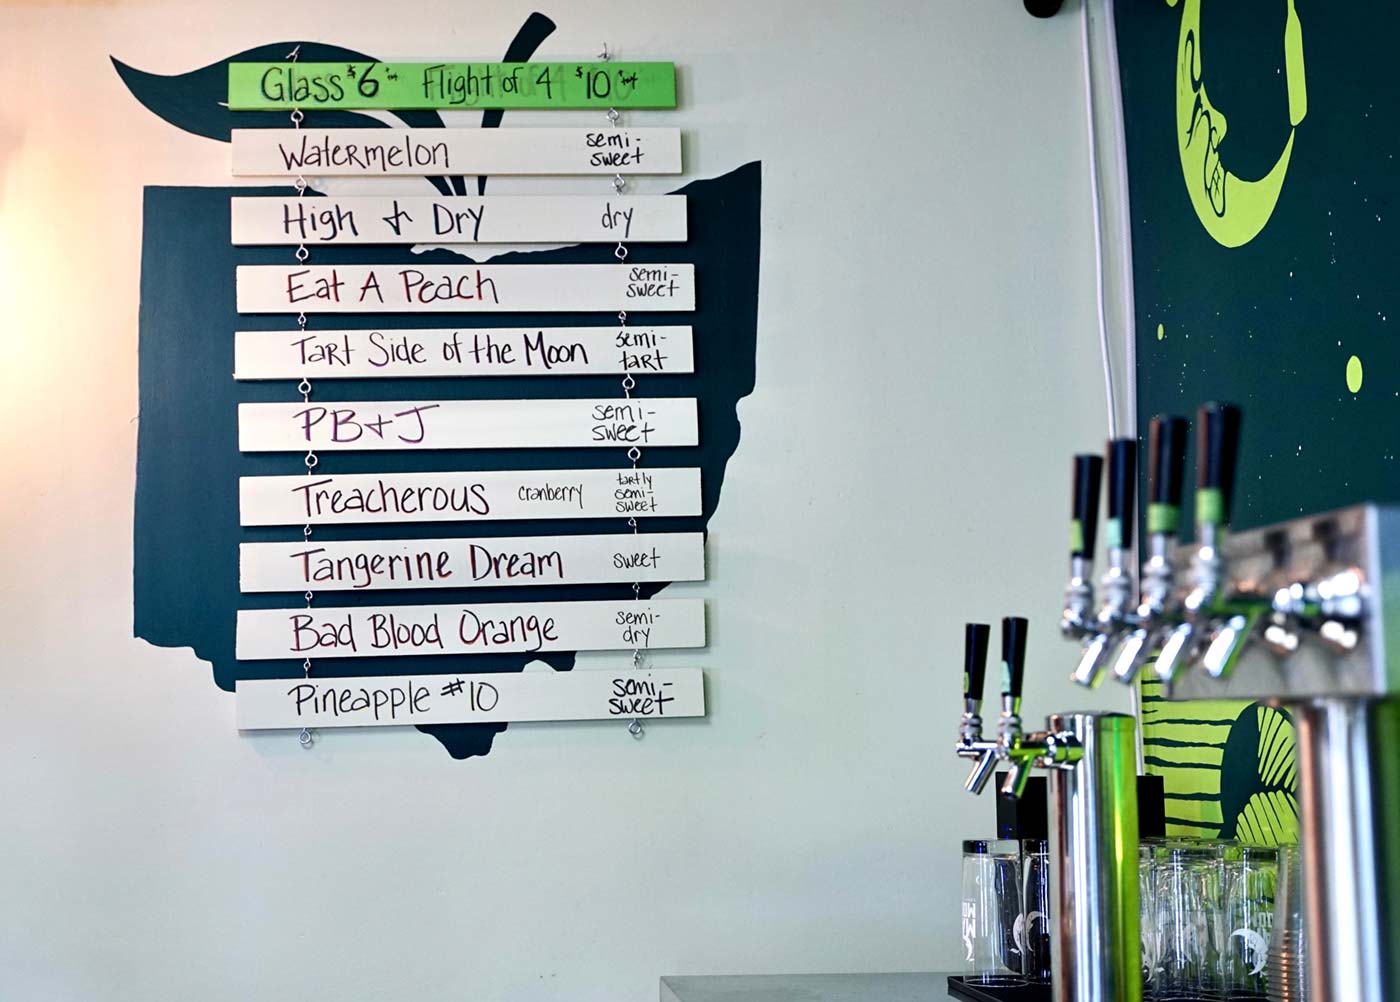 The menu board at Mad Moon shows a variety of cider flavors and styles.